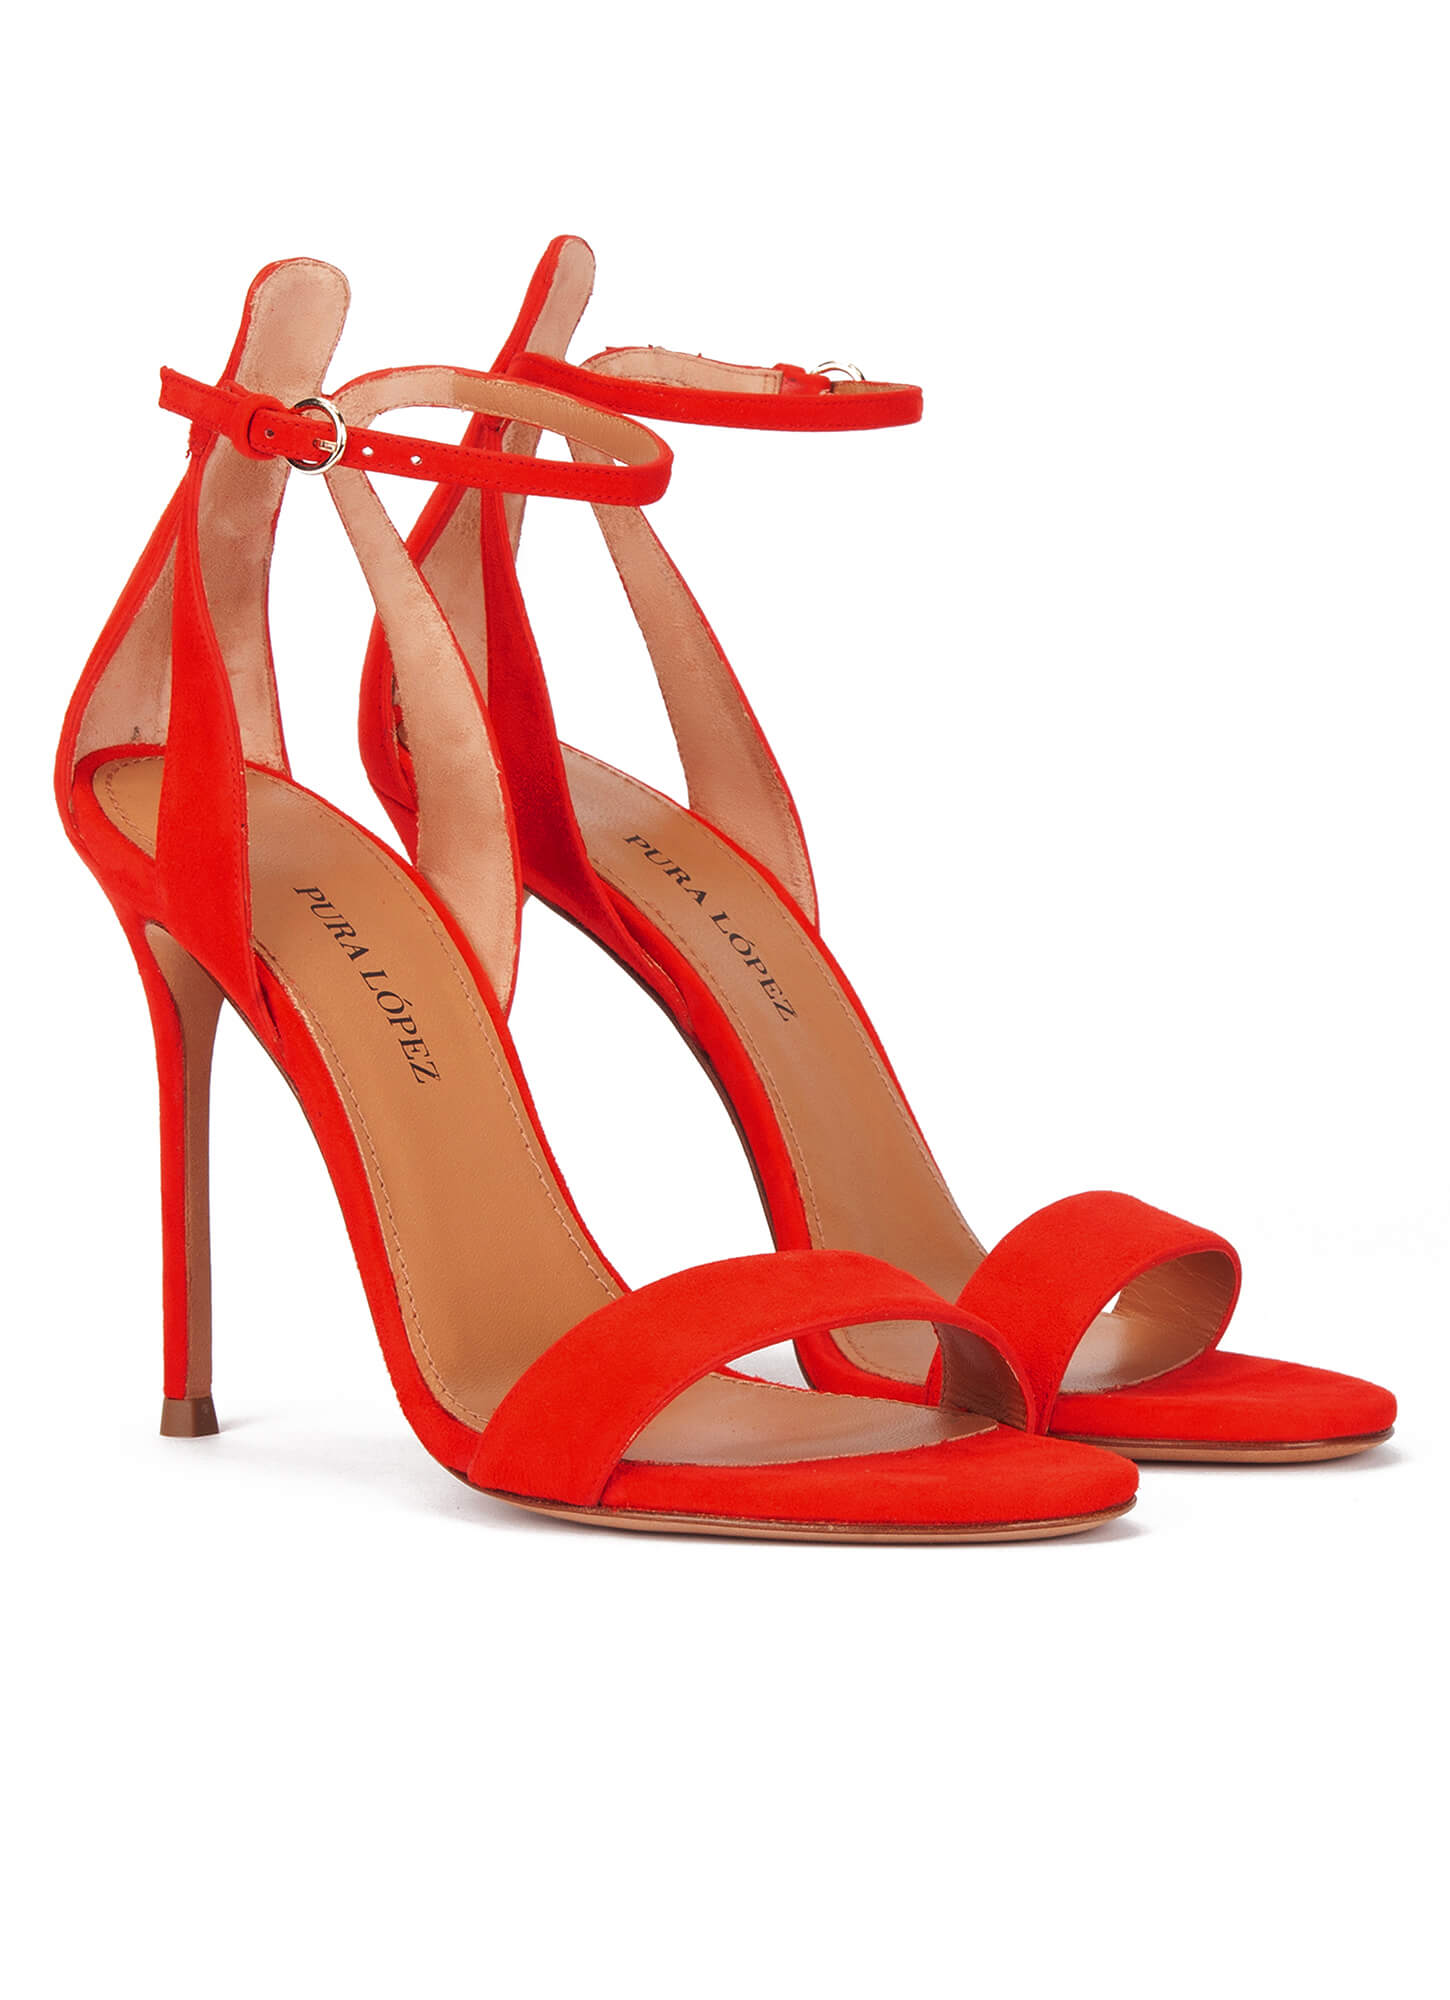 red platform heels with ankle strap